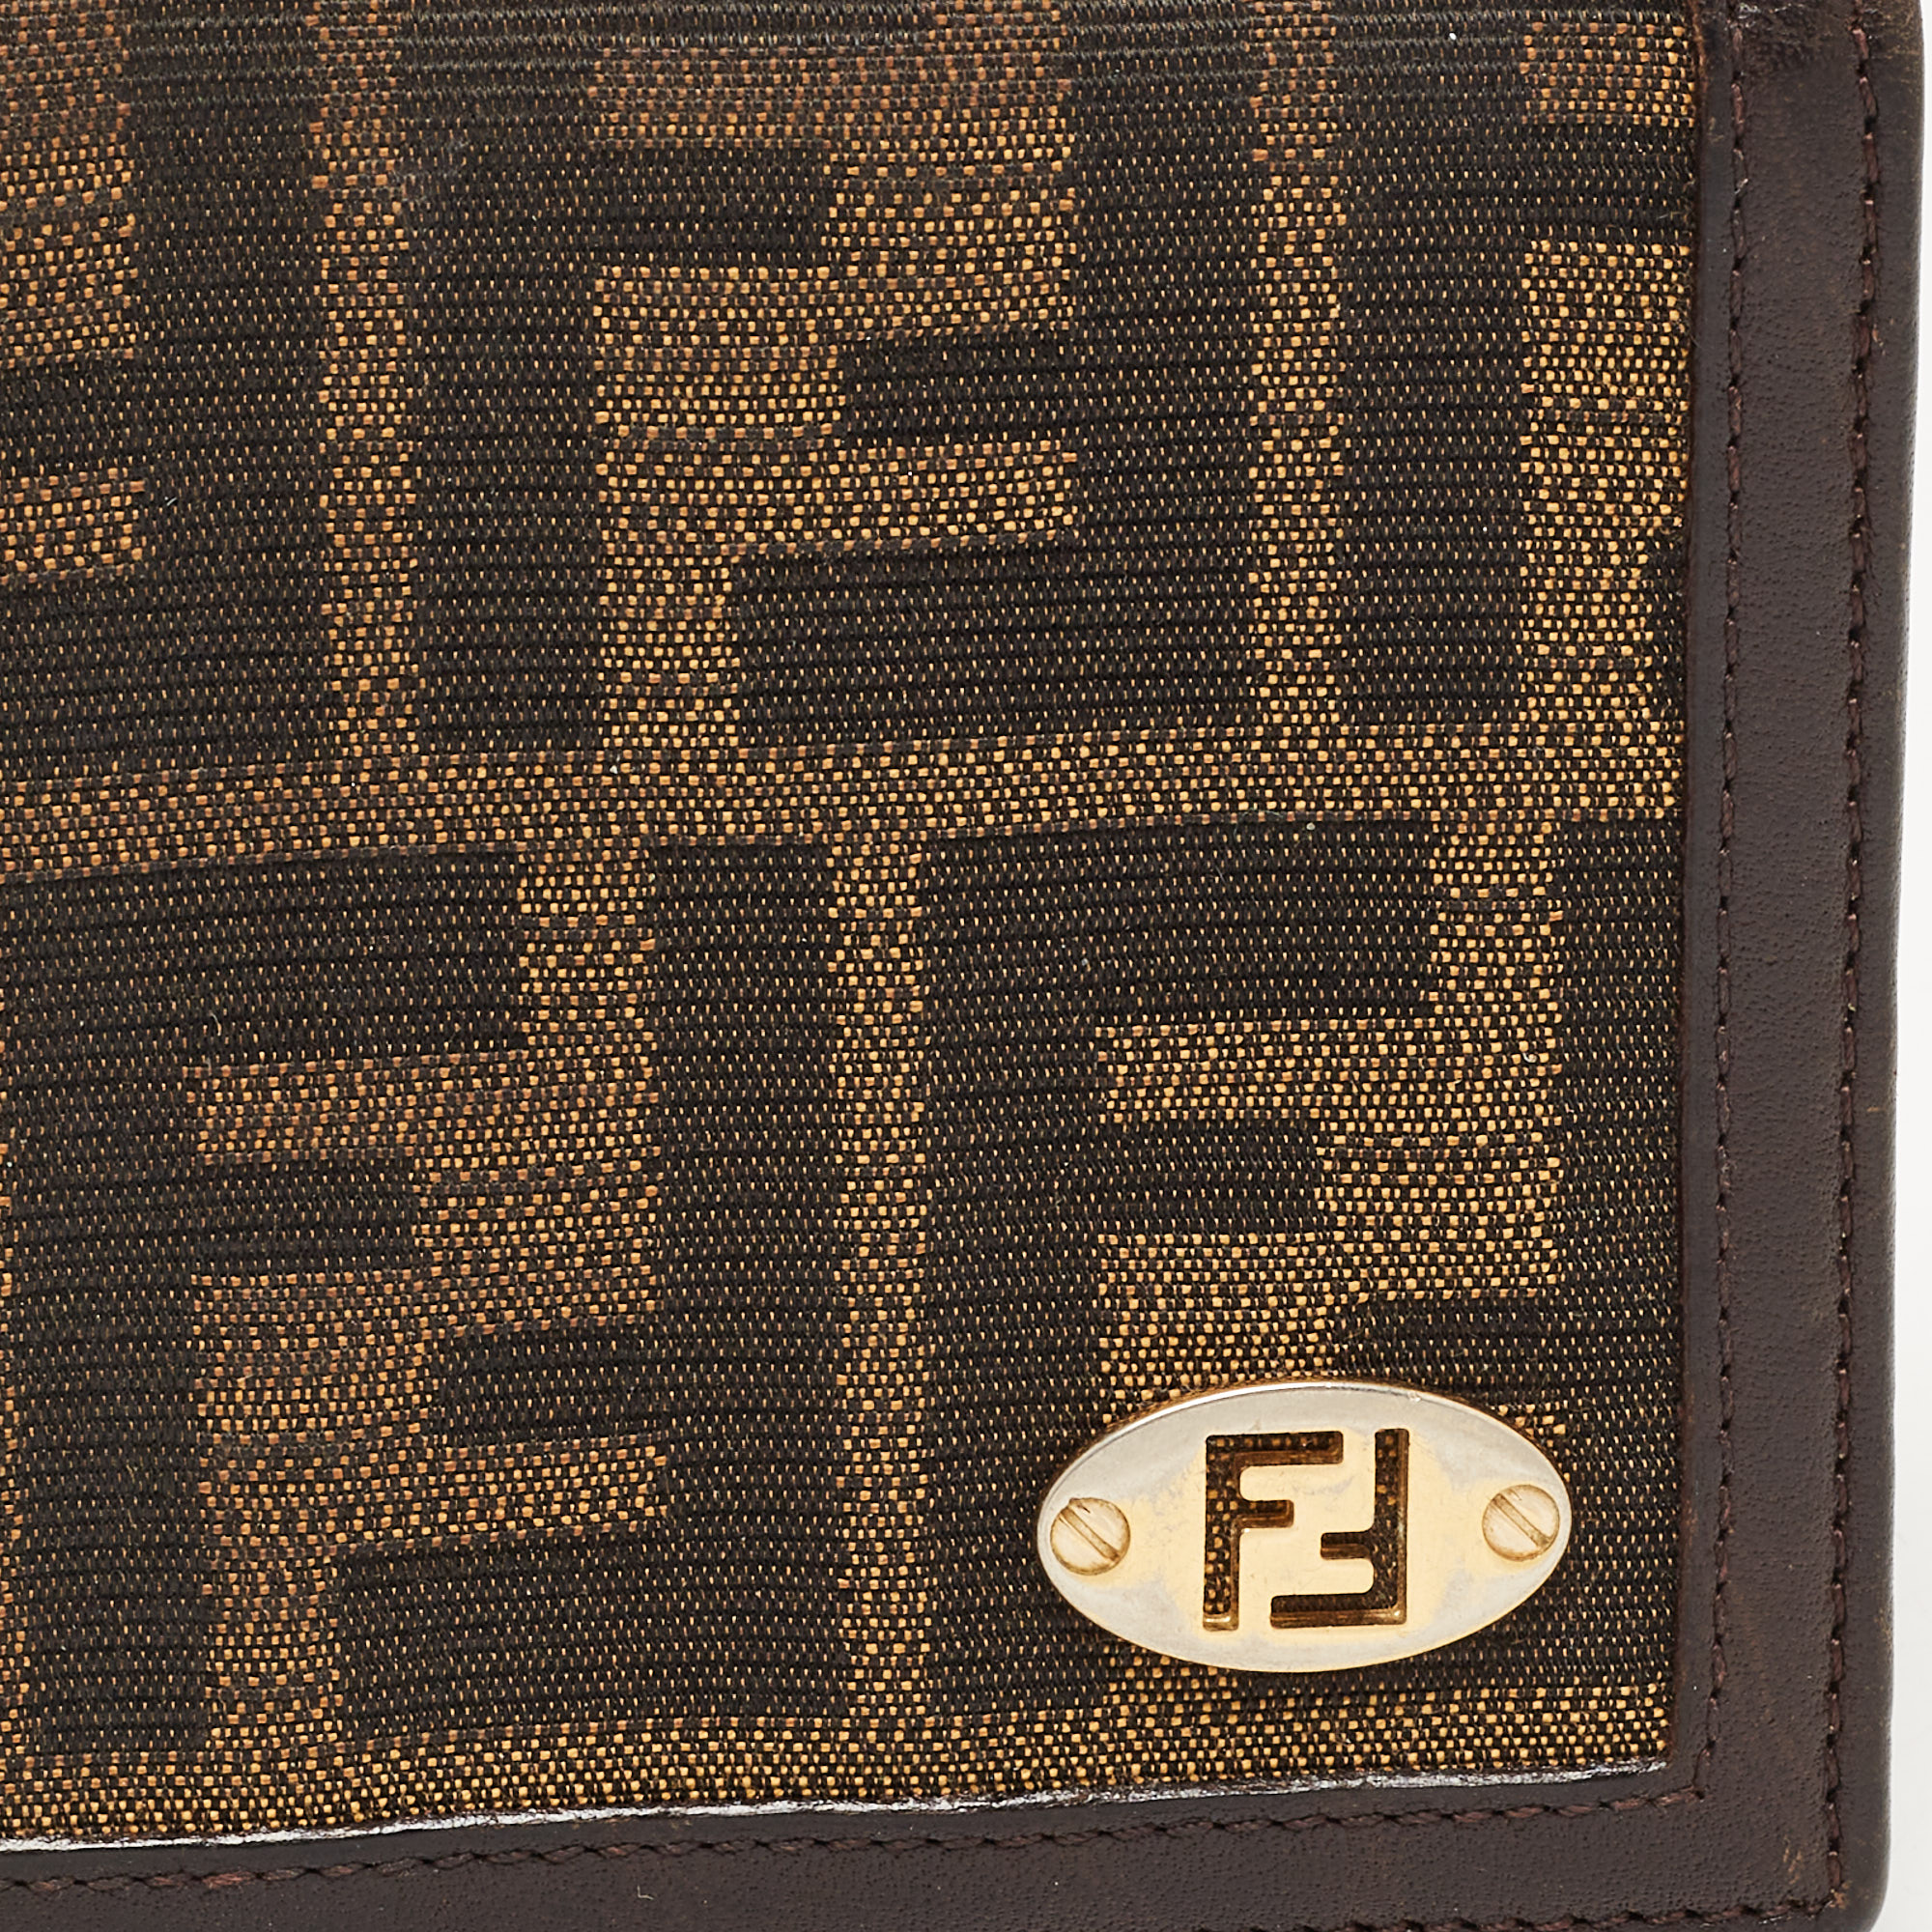 Fendi Tobacco Zucca Canvas And Leather FF Flap Continental Wallet